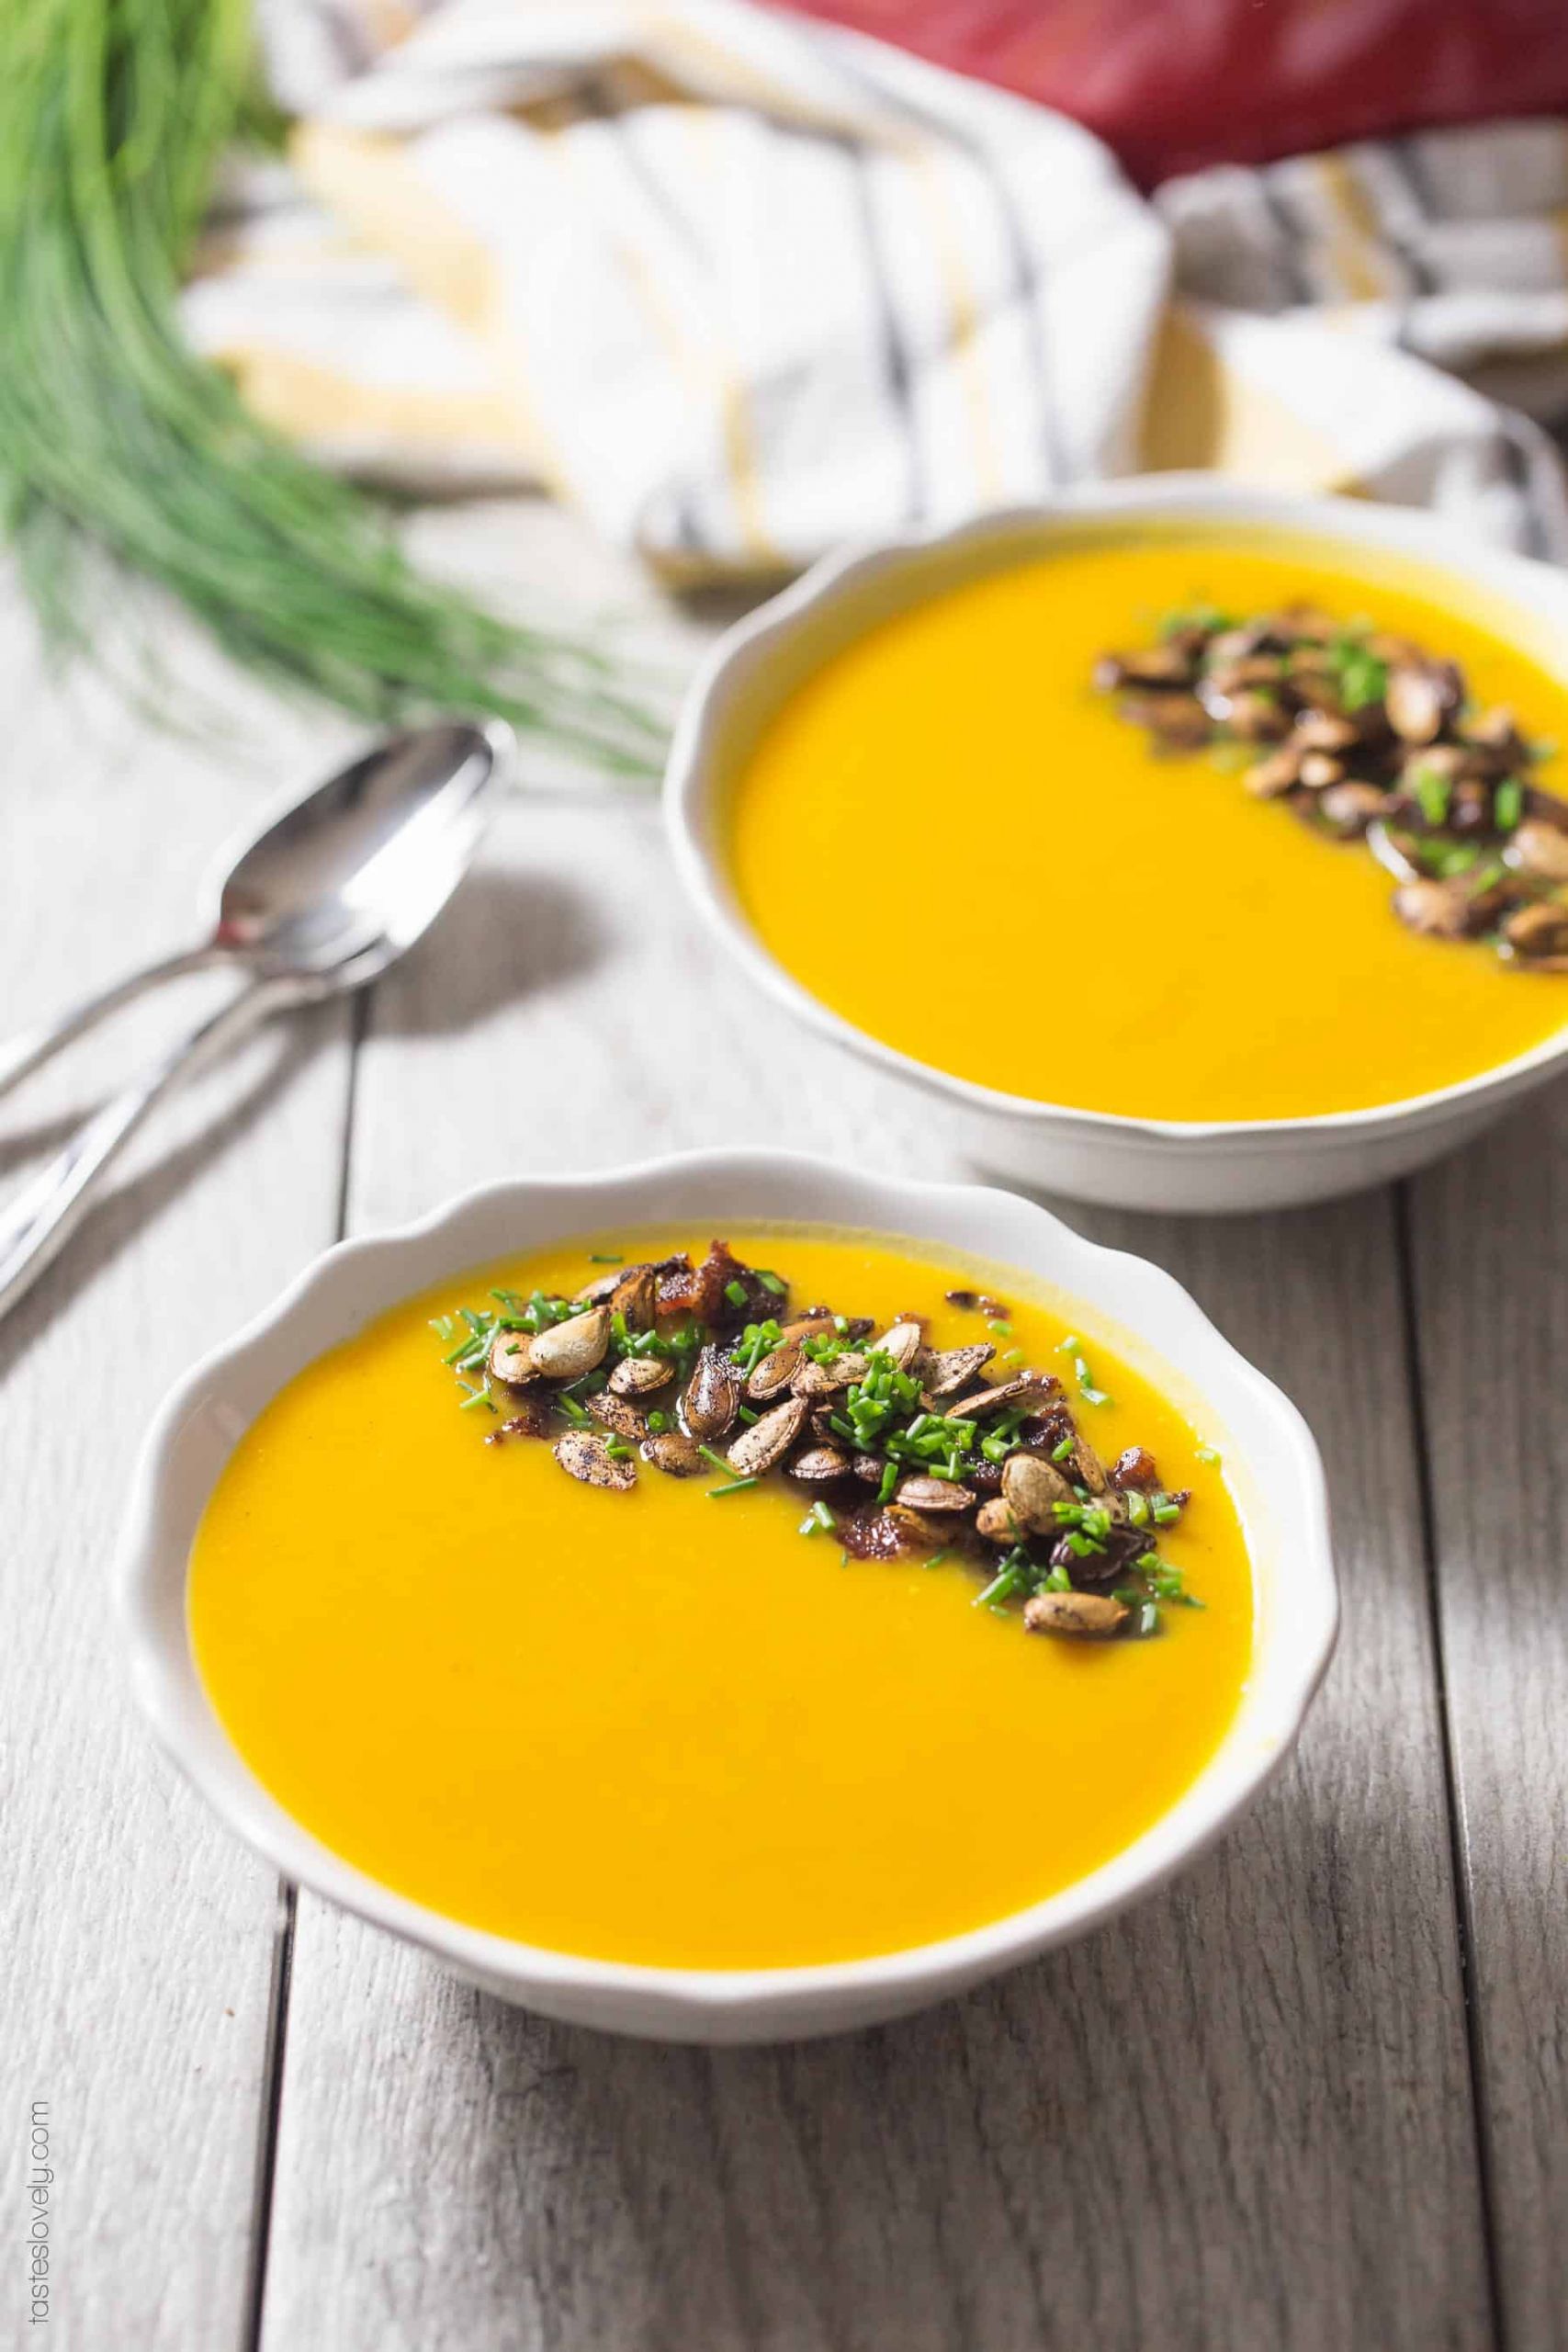 15 Of the Best Ideas for Paleo butternut Squash soup